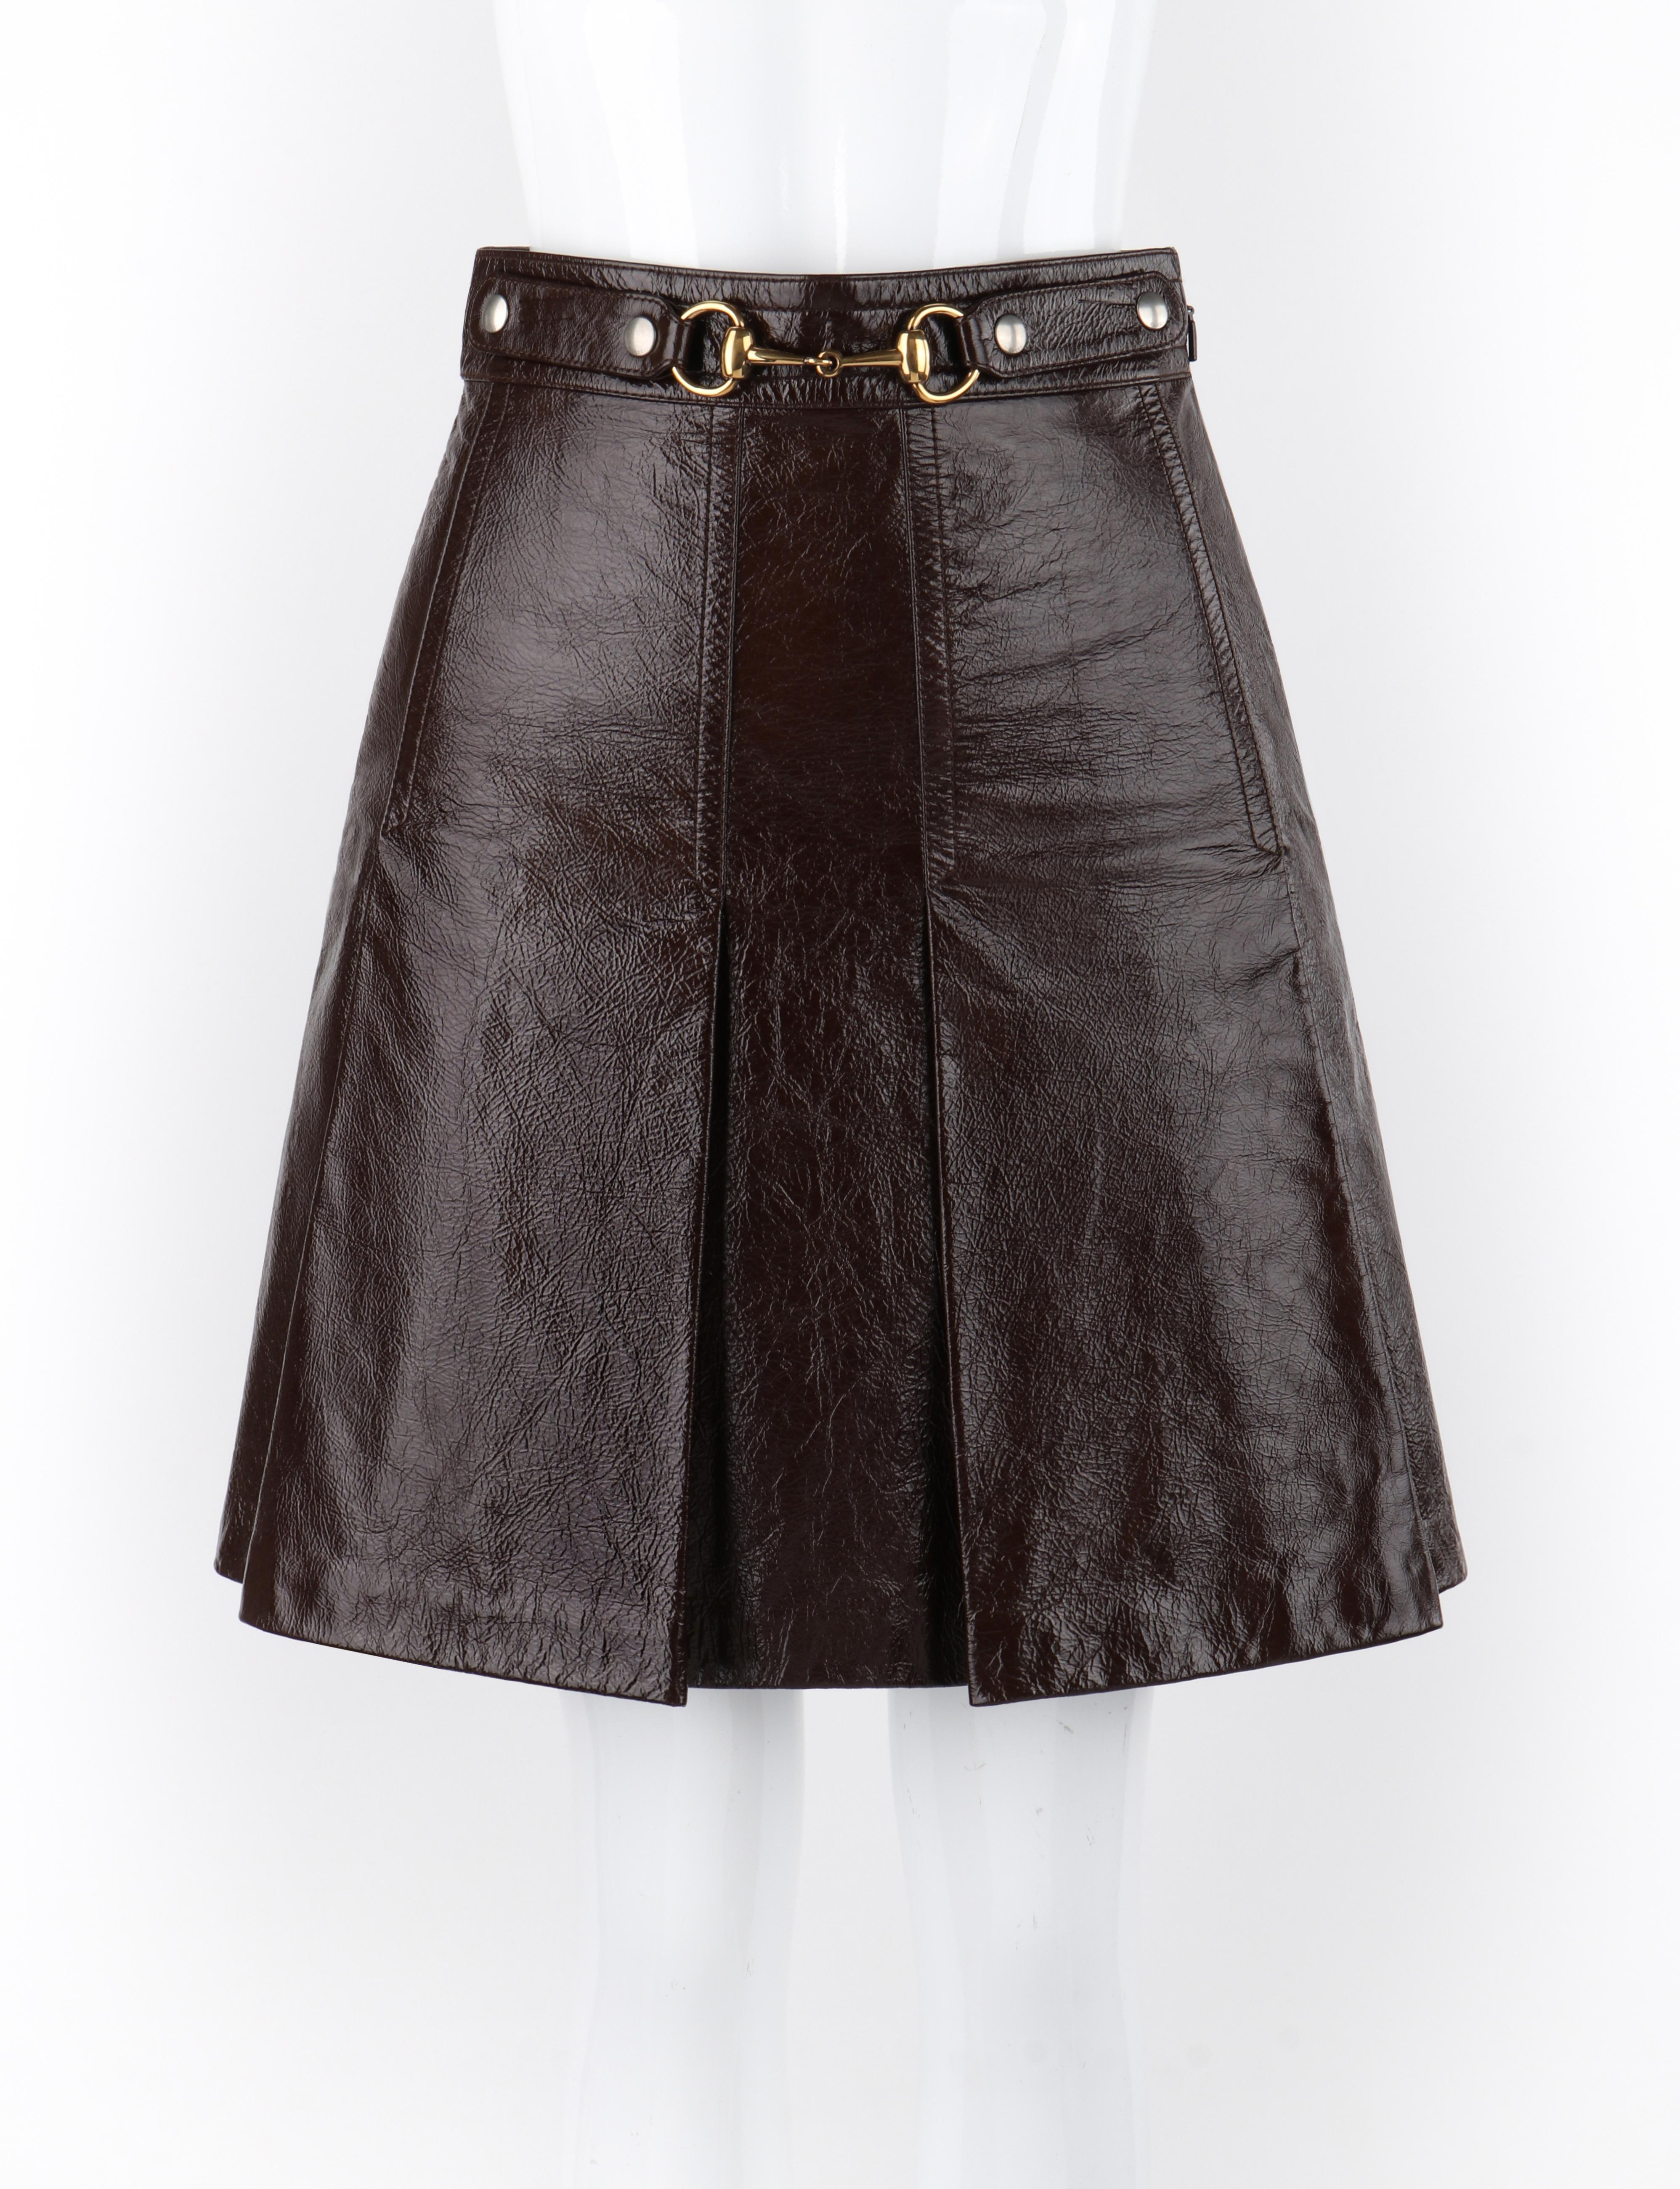 GUCCI Fall 2017 Brown Genuine Leather Gold Horsebit Buckle Pleated Mini Skirt

Brand / Manufacturer: Gucci
Collection: Fall 2017
Designer: Alessandro Michele
Style: Mini Skirt
Color(s): Shades of brown, gold, silver
Lined: Yes
Marked Fabric Content: